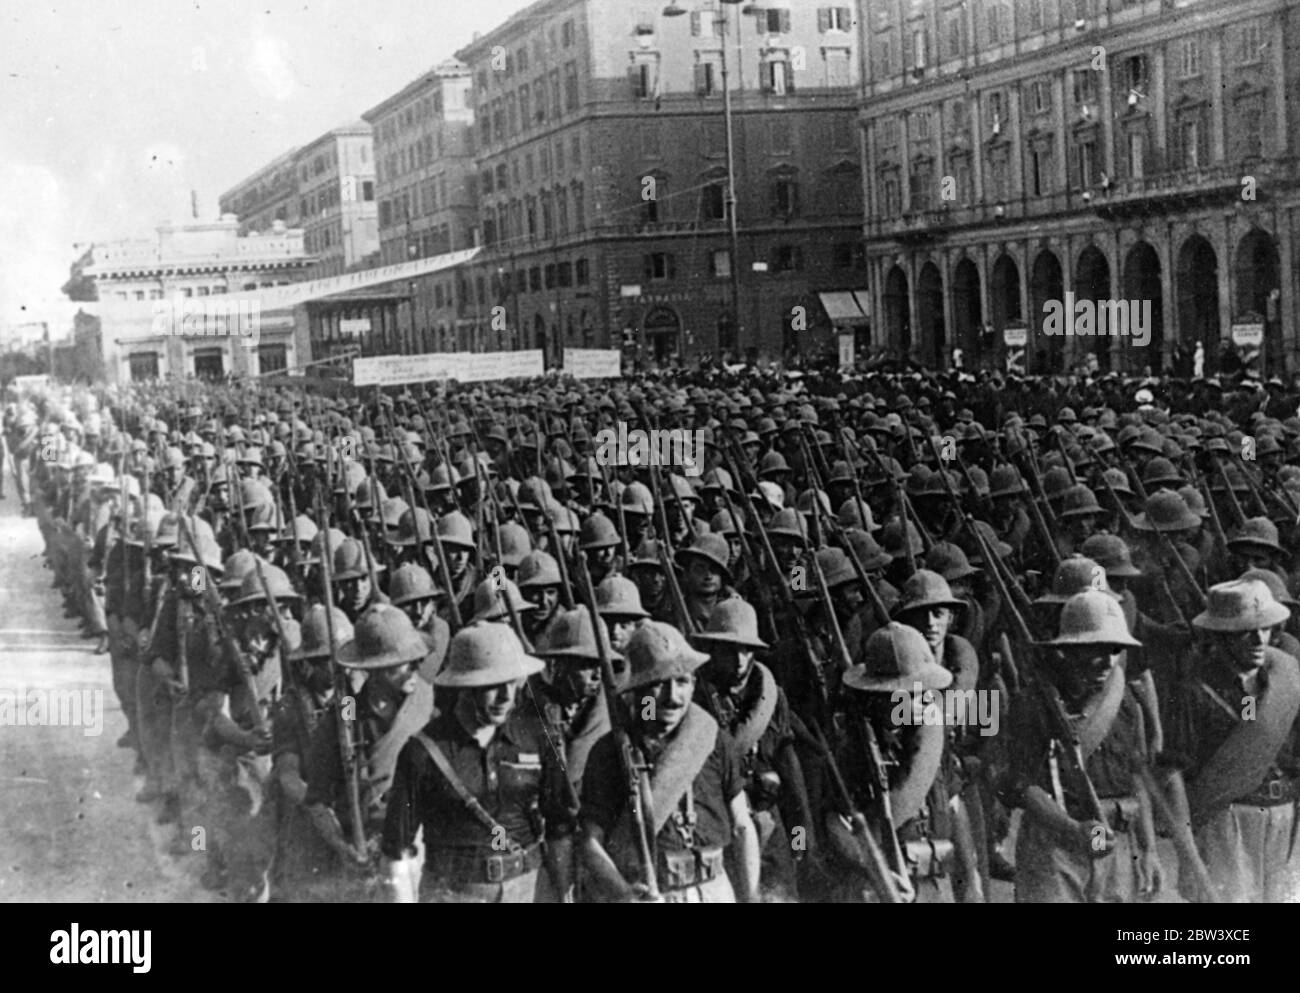 Mussolini welcomes troops returning from Abyssinian service . Hand raised in salute , Signor Mussolini welcomed a large detachment of sun - helmeted Italian troops as they marched with full equipment through the Piazza Venezia in Rome on their return from service in Abyssinia . Large crowds gathered in the streets to greet the returning battalions . Photo shows : Italian troops , wearing sun - helmets and full equipment , marching through the Piazza Venezia in Rome on their return from Addis Ababa . 11 September 1936 Stock Photo